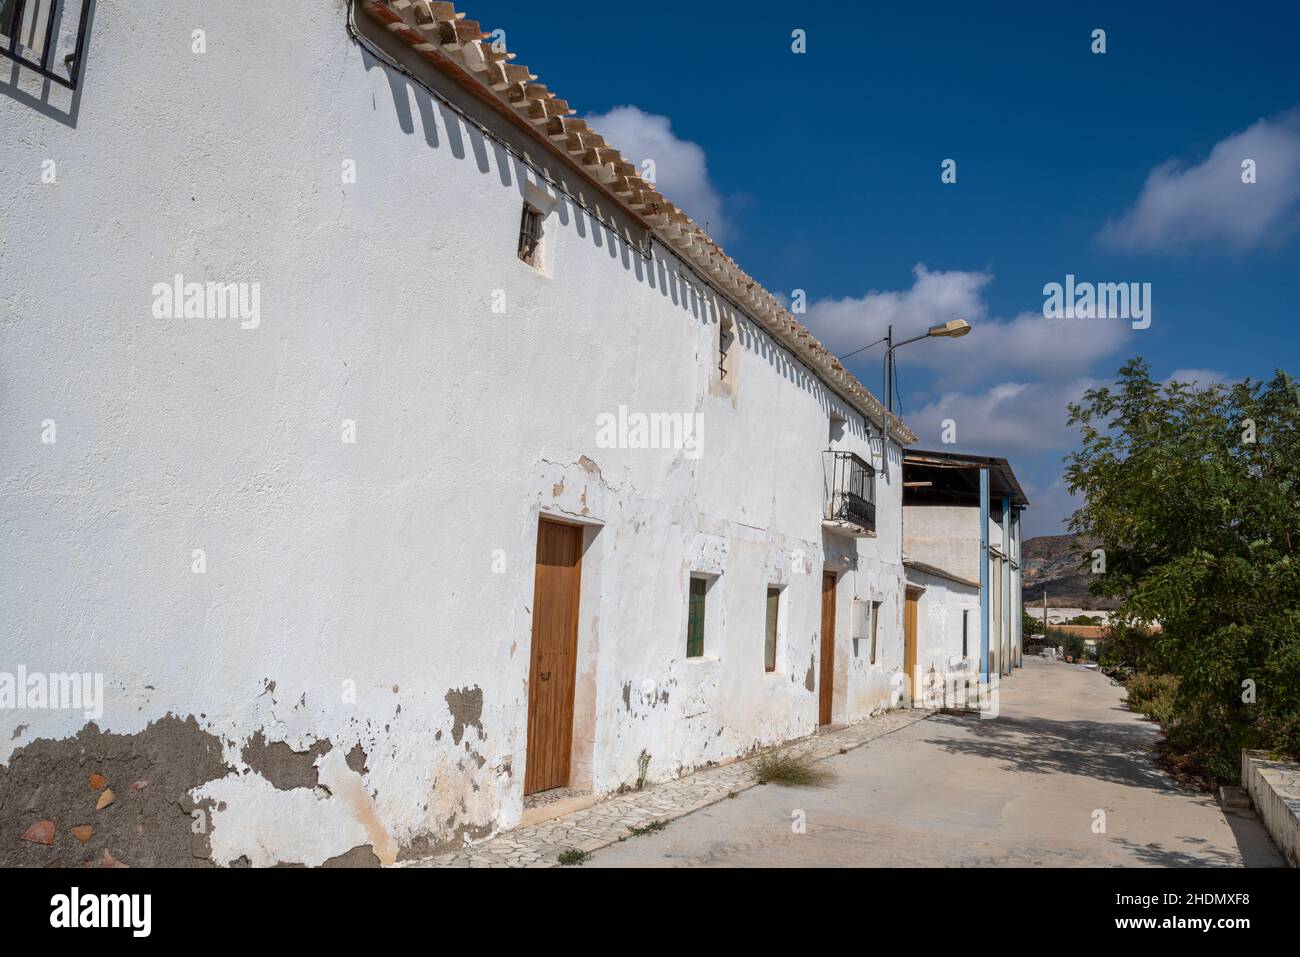 Spanish property for sale in rural area outside Albox, Almeria, Andalusia, Spain, typical of properties advertised to British ex-pats for renovation Stock Photo